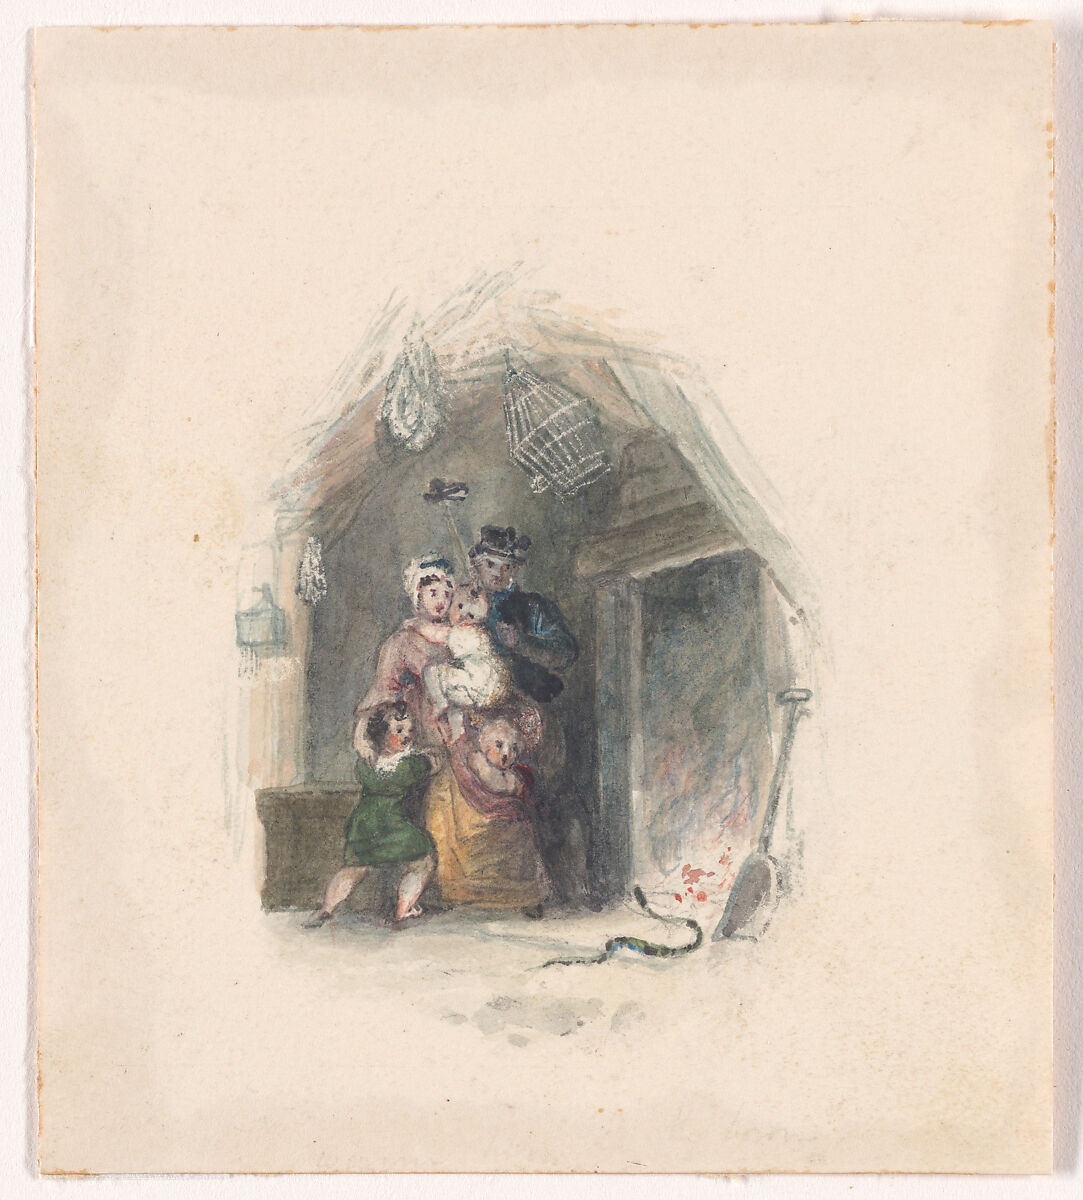 Illustration design for "The Economy of Human Life", Frank Howard (British, London 1805–1866 Liverpool), Watercolor 